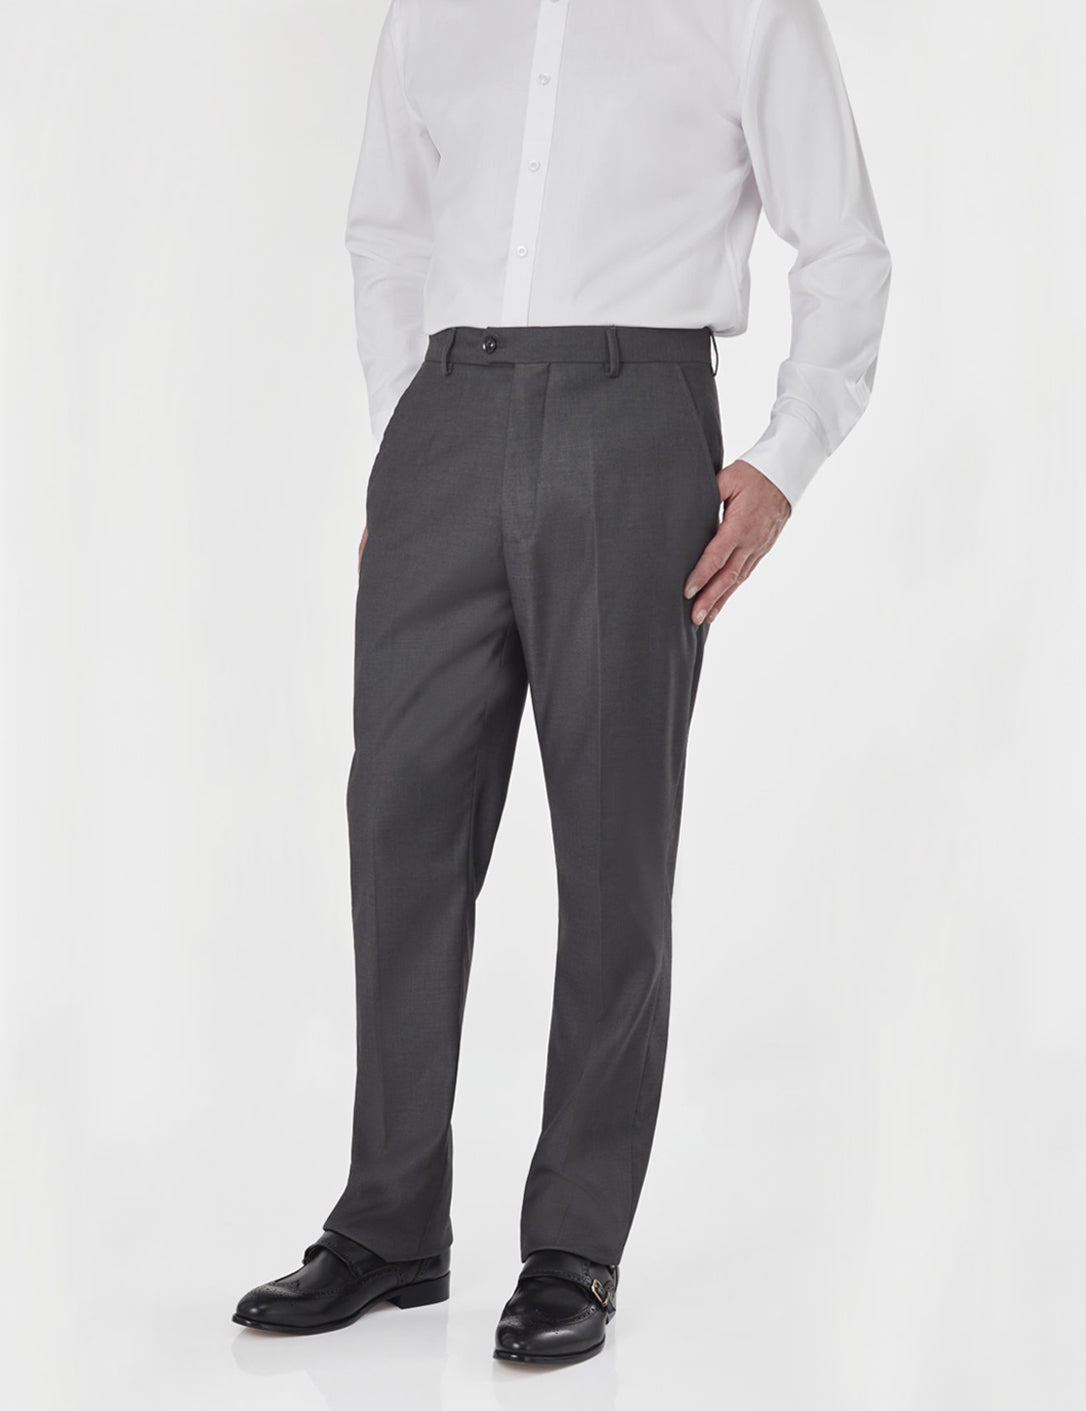 GREY FORMAL TROUSERS